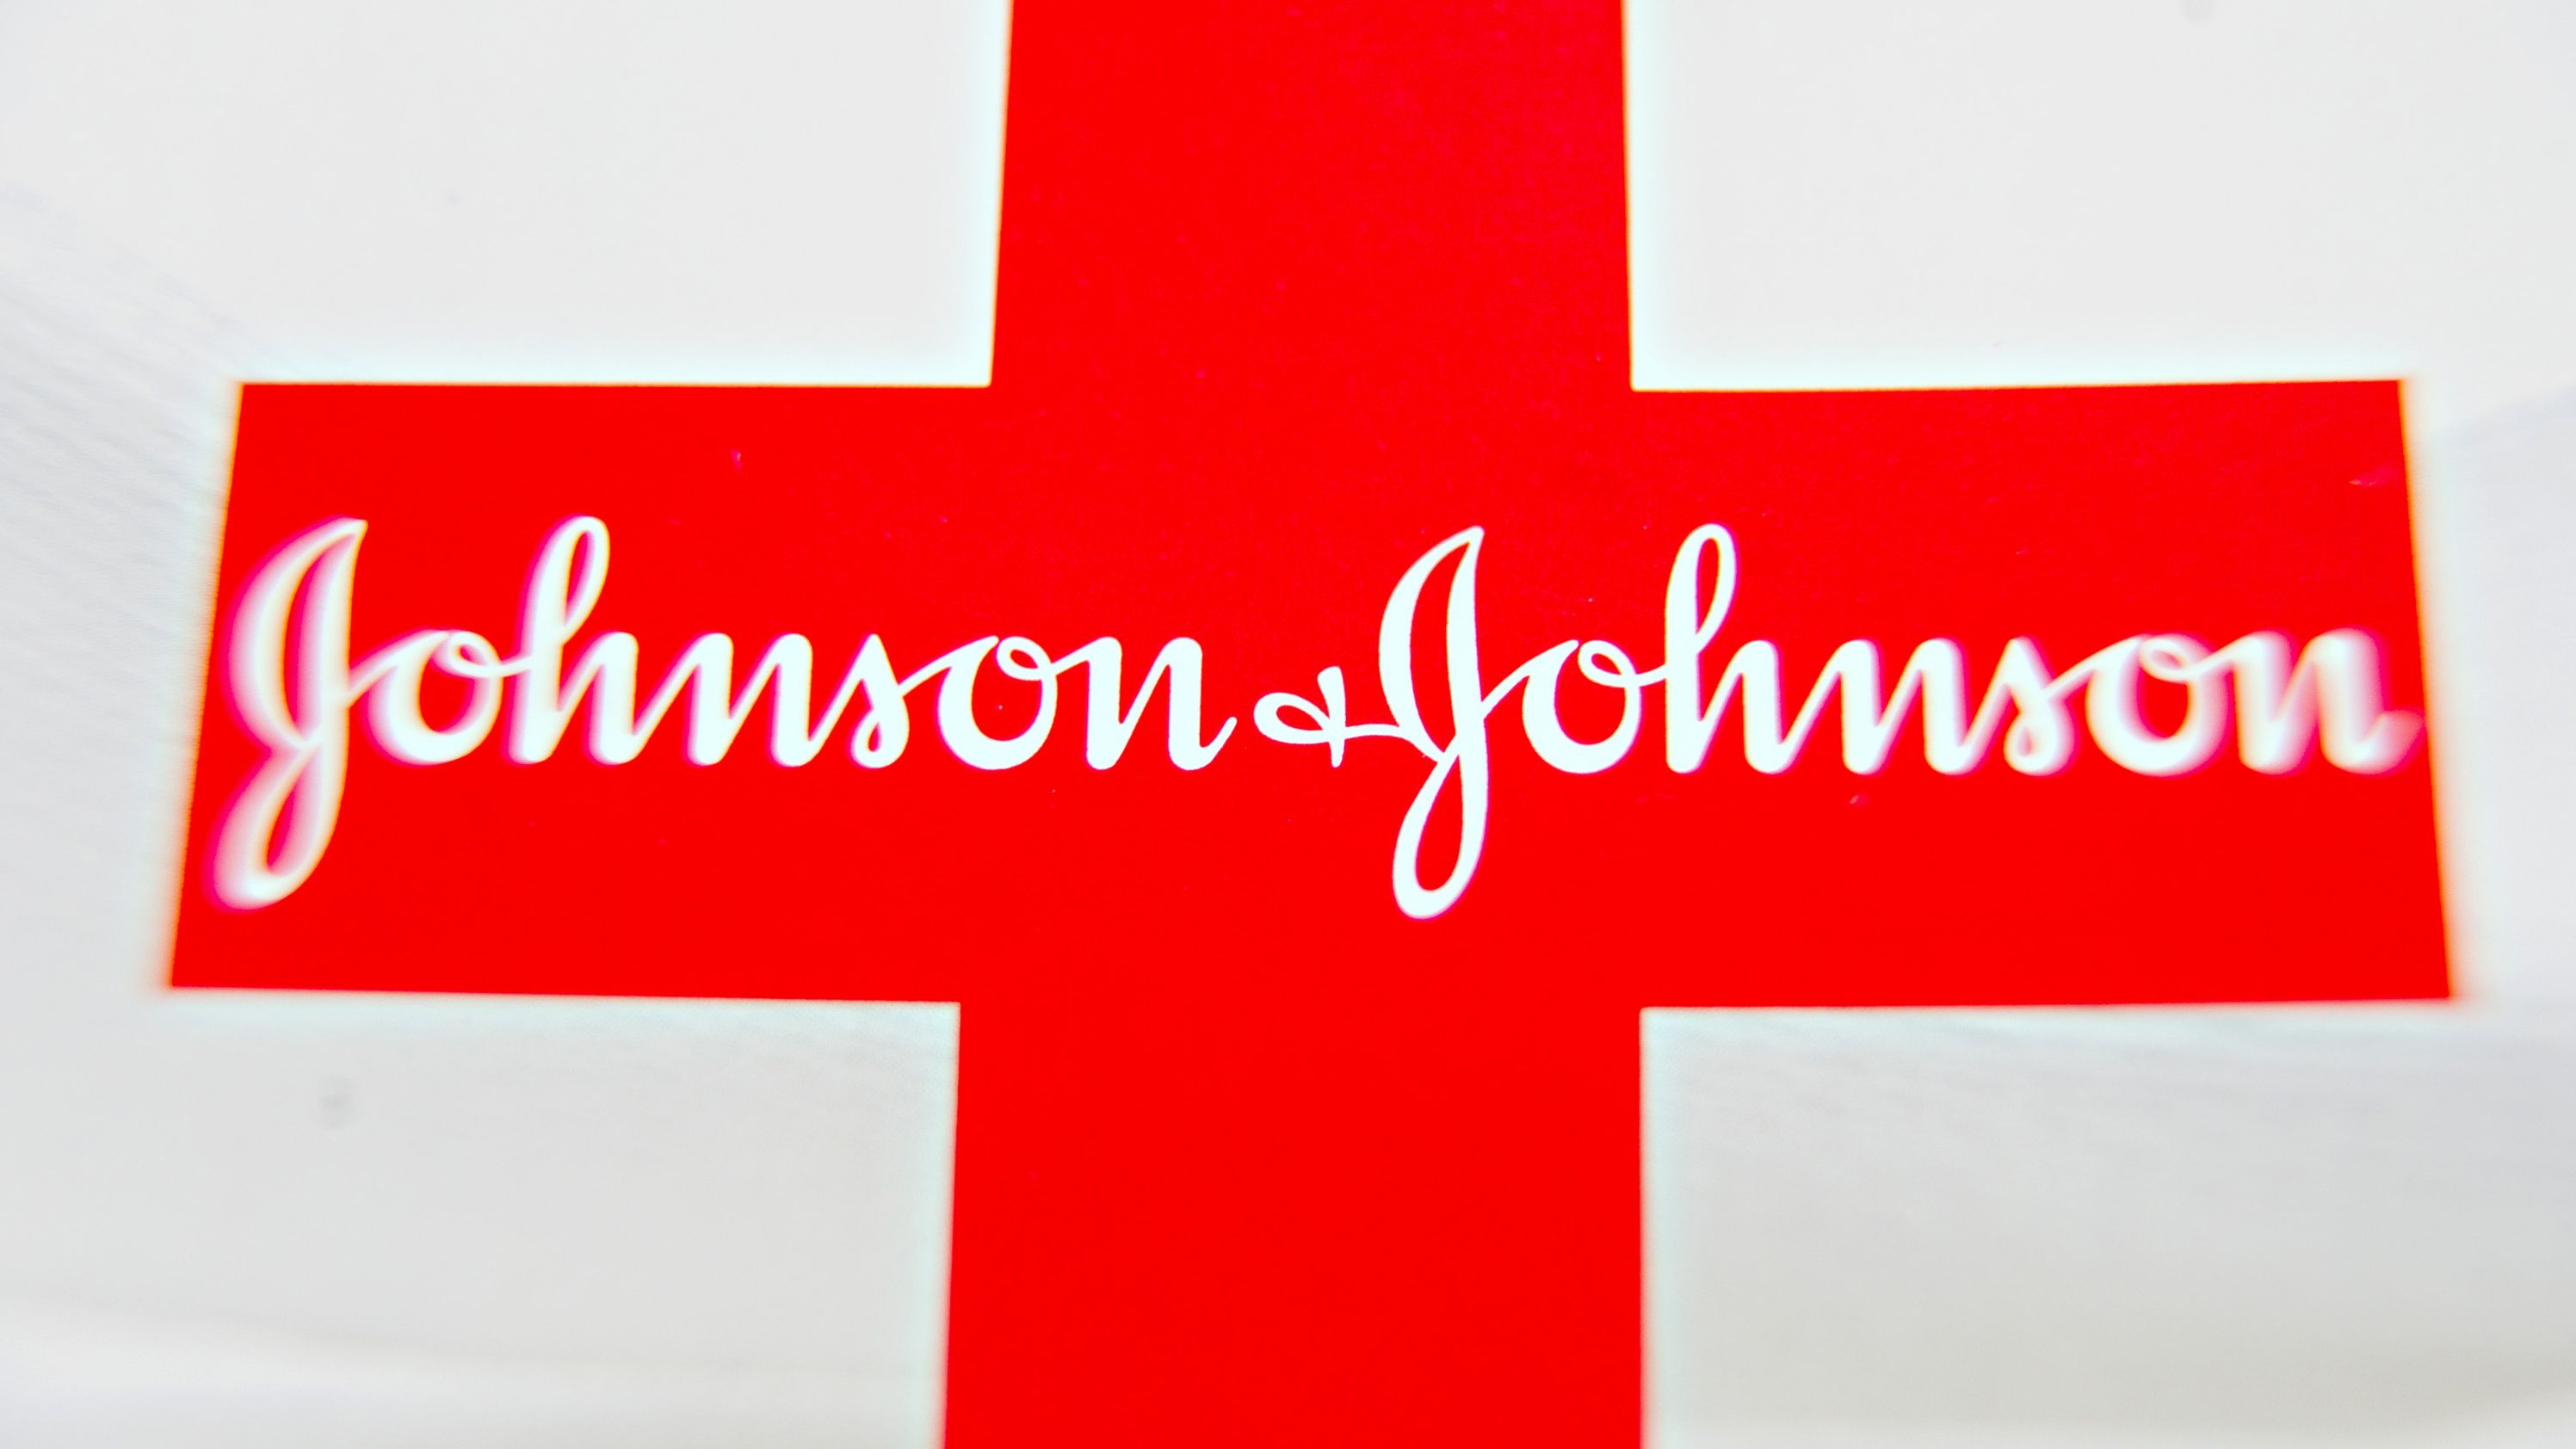 Among other things, jurors ruled that Johnson & Johnson and DePuy were negligent in designing the hip implant.